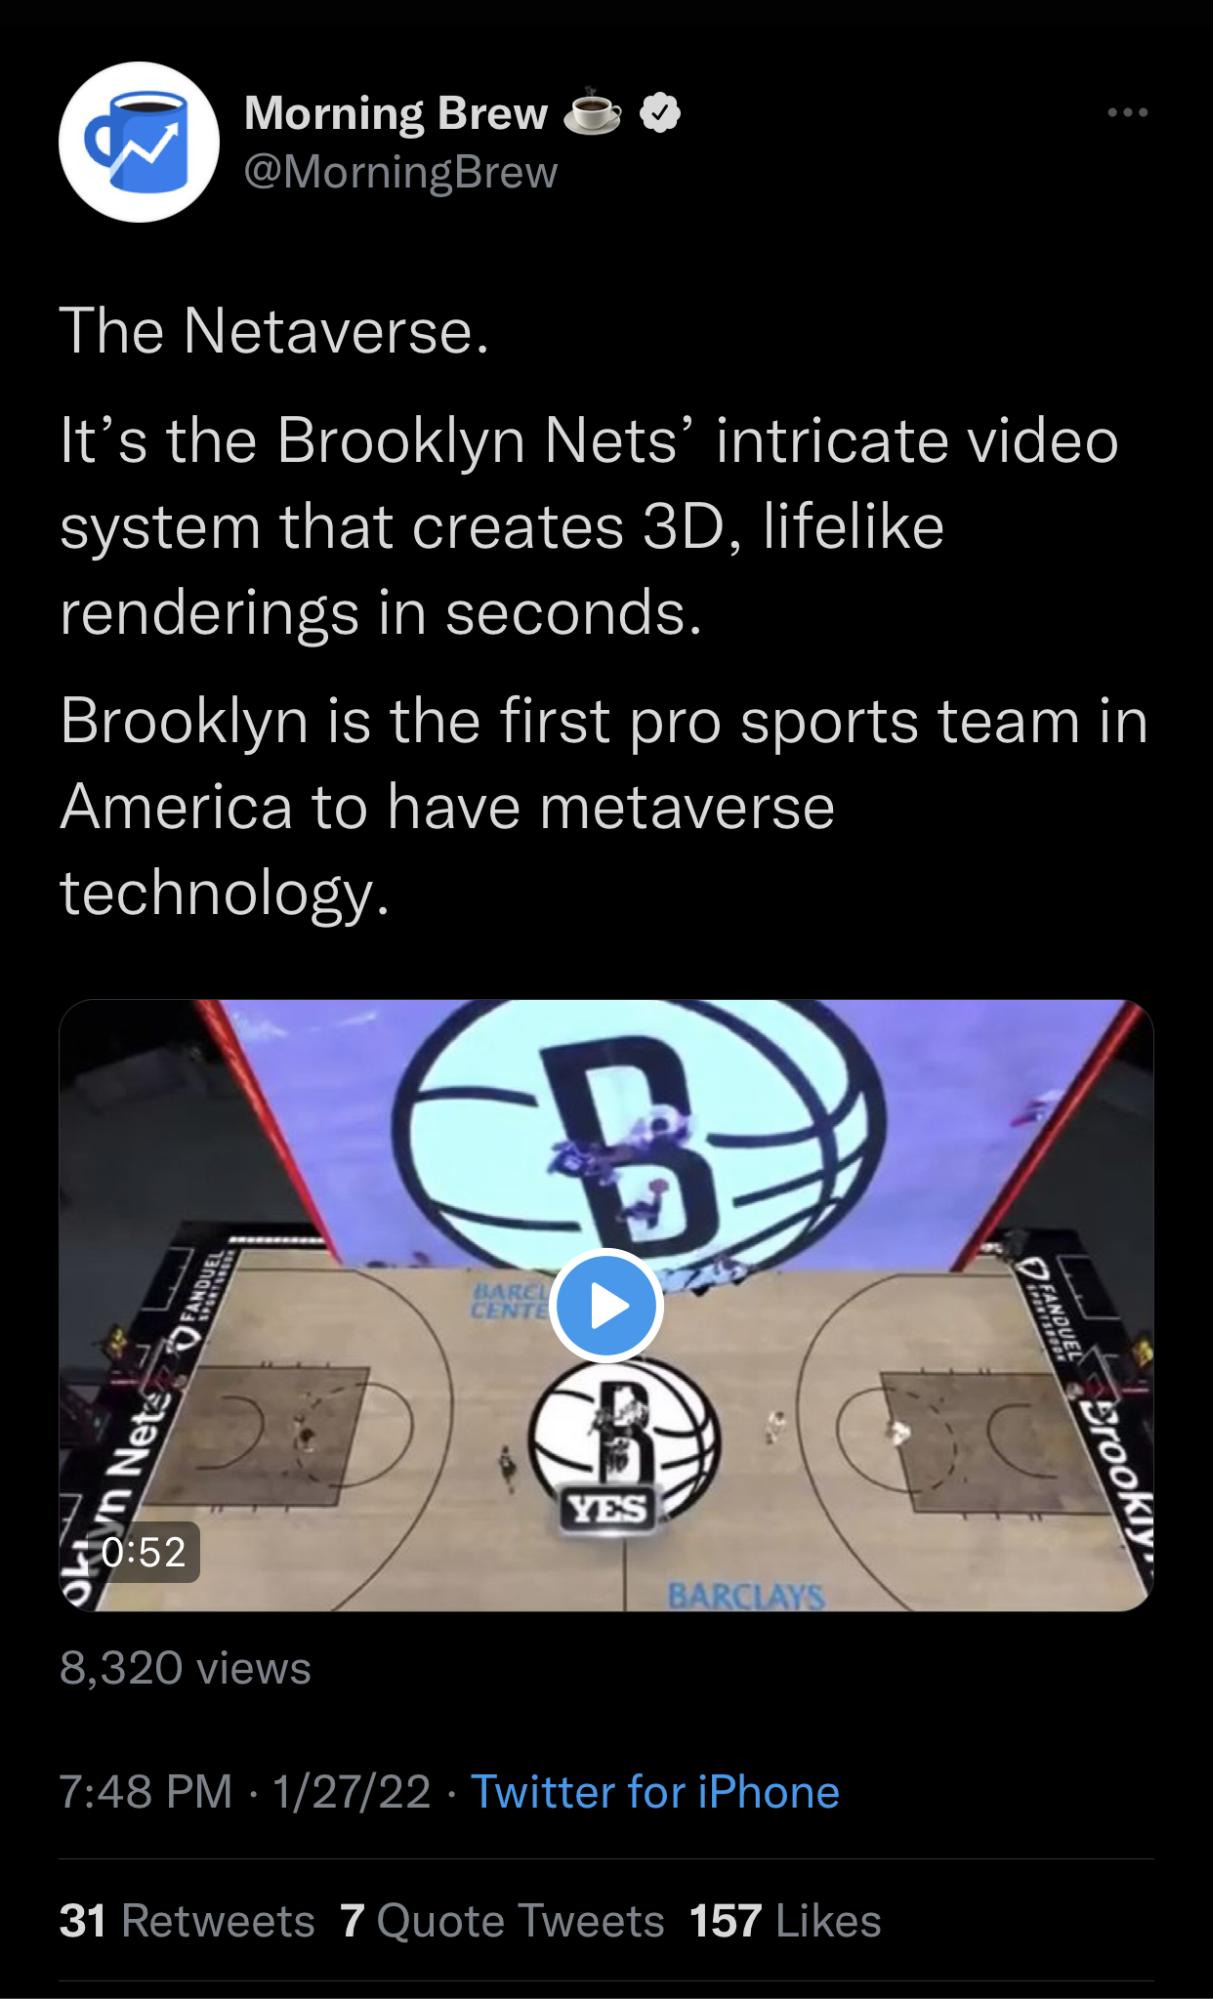 Morning Brew tweet about the Brooklyn Nets entering the metaverse